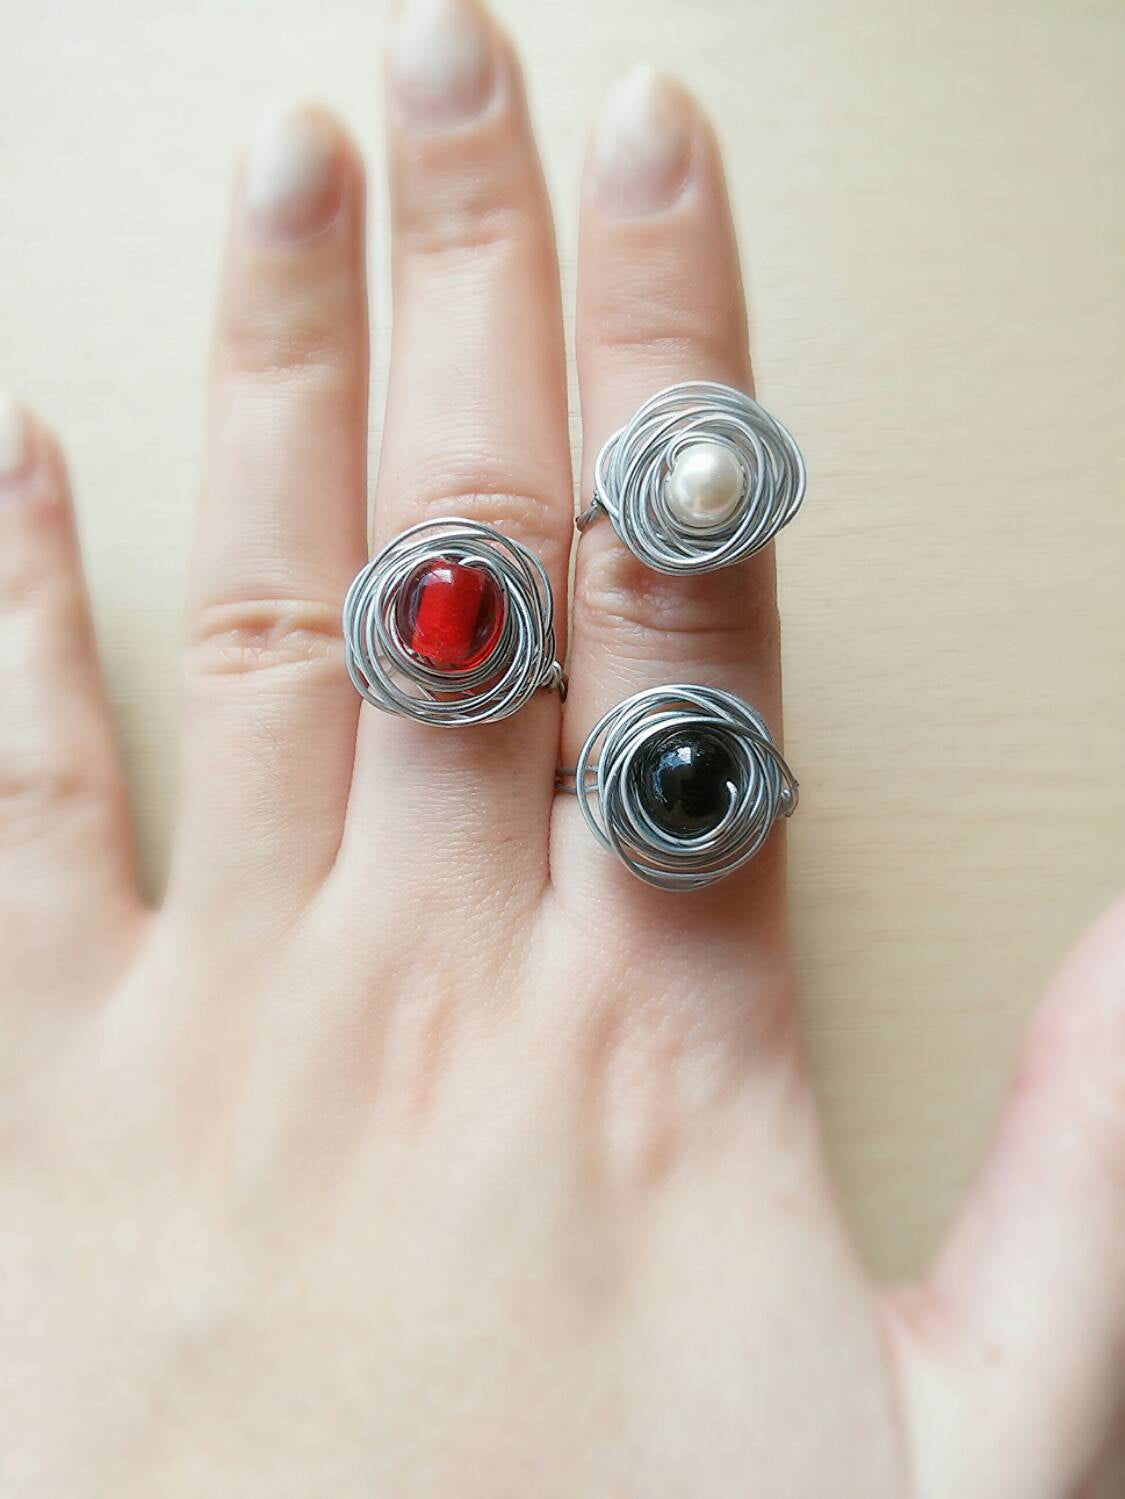 Black white and red pearl boho ring set/boho ring set/girl gift rings/hippie ring/boho wire ring/adjustable/statement ring/wire pearl ring